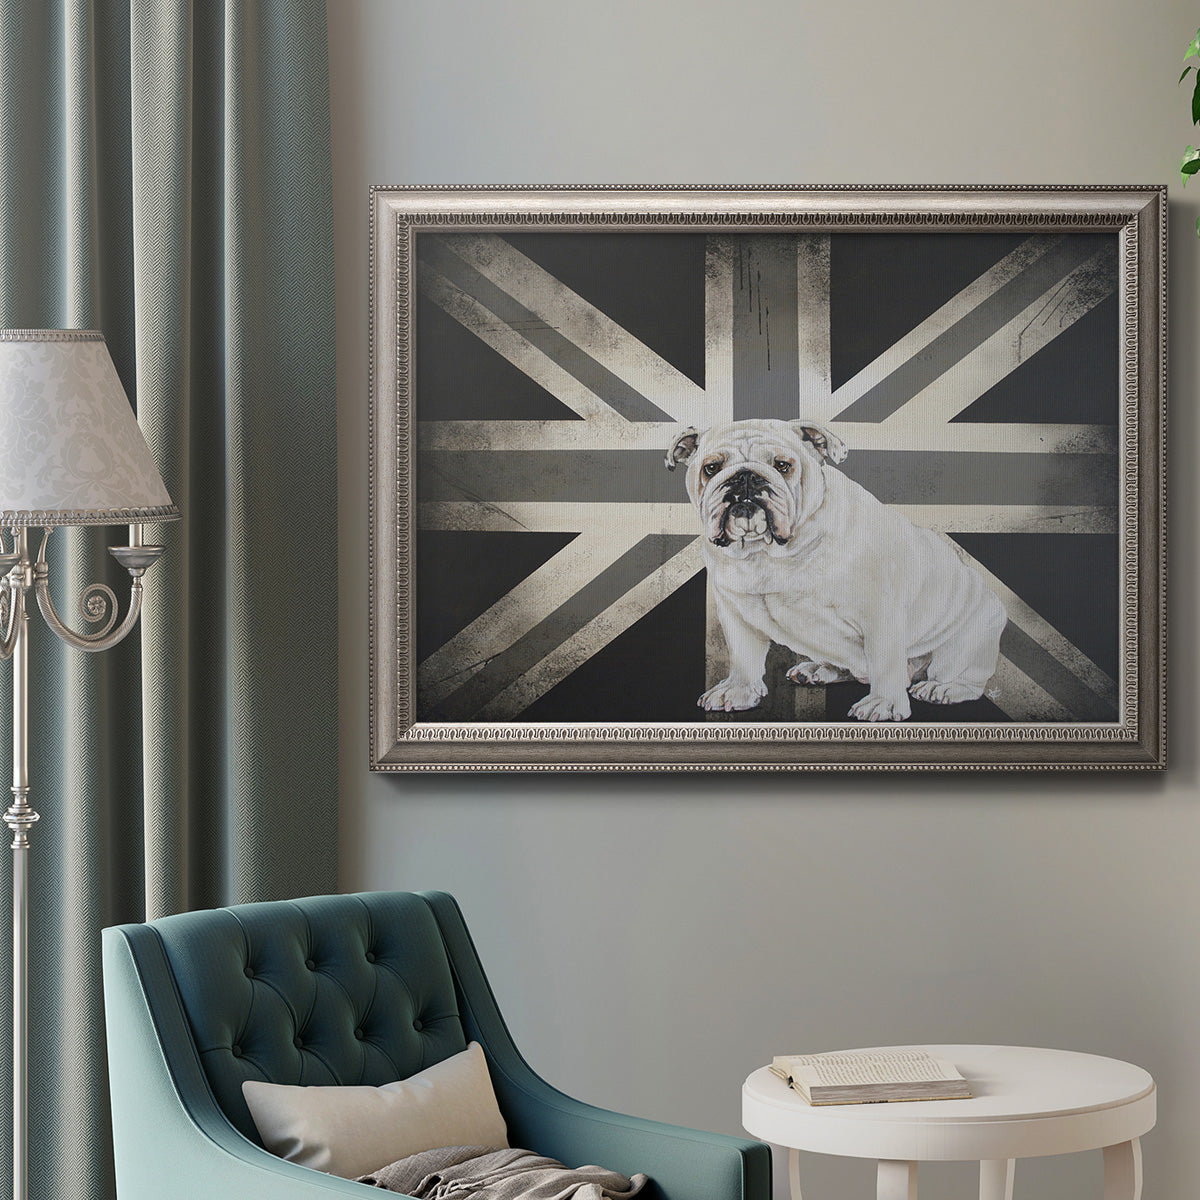 Best of British B&W Premium Framed Canvas- Ready to Hang